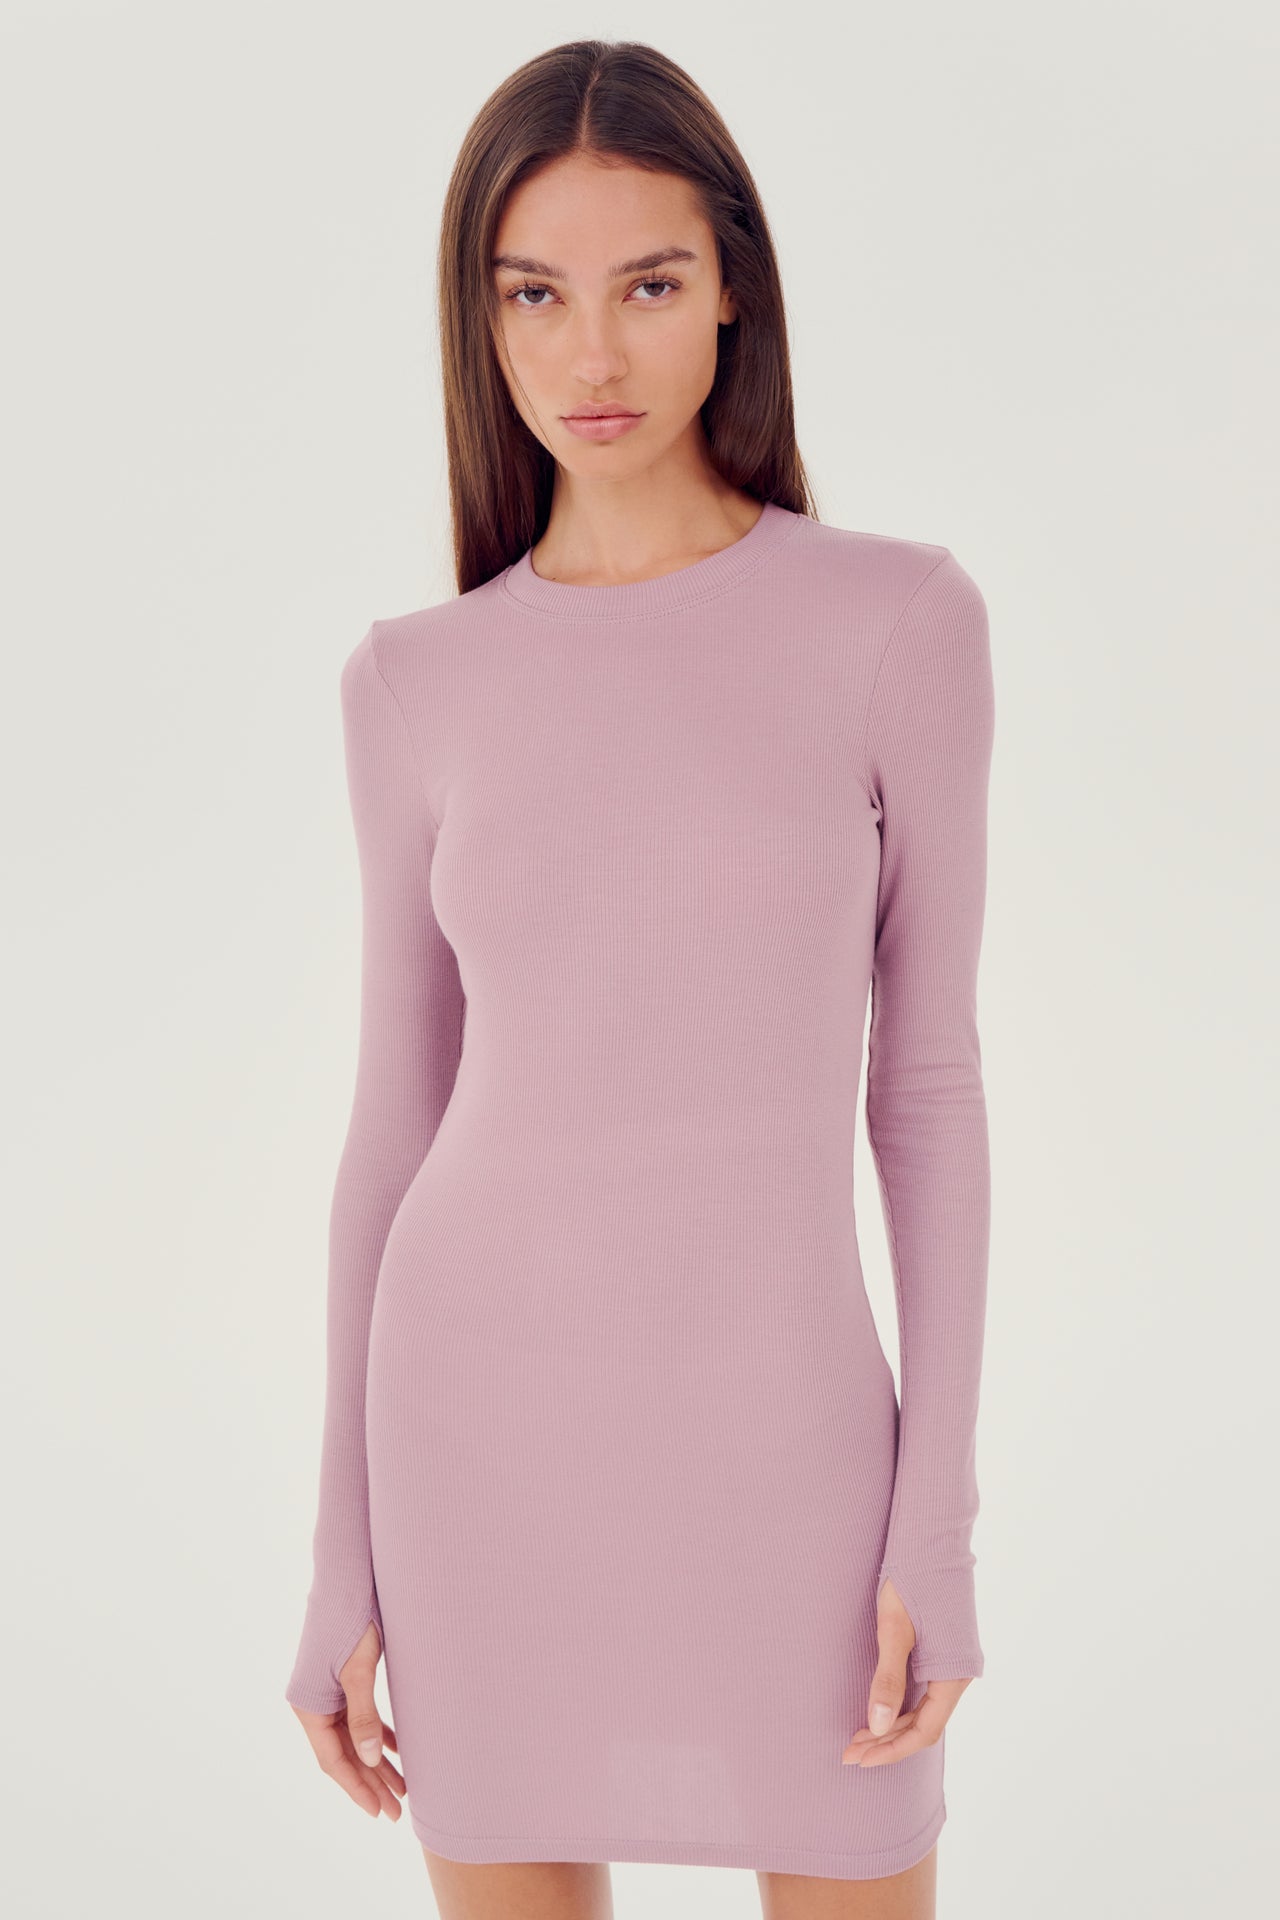 The Louise Rib Long Sleeve Dress in Blush is perfect for casual wear from SPLITS59.